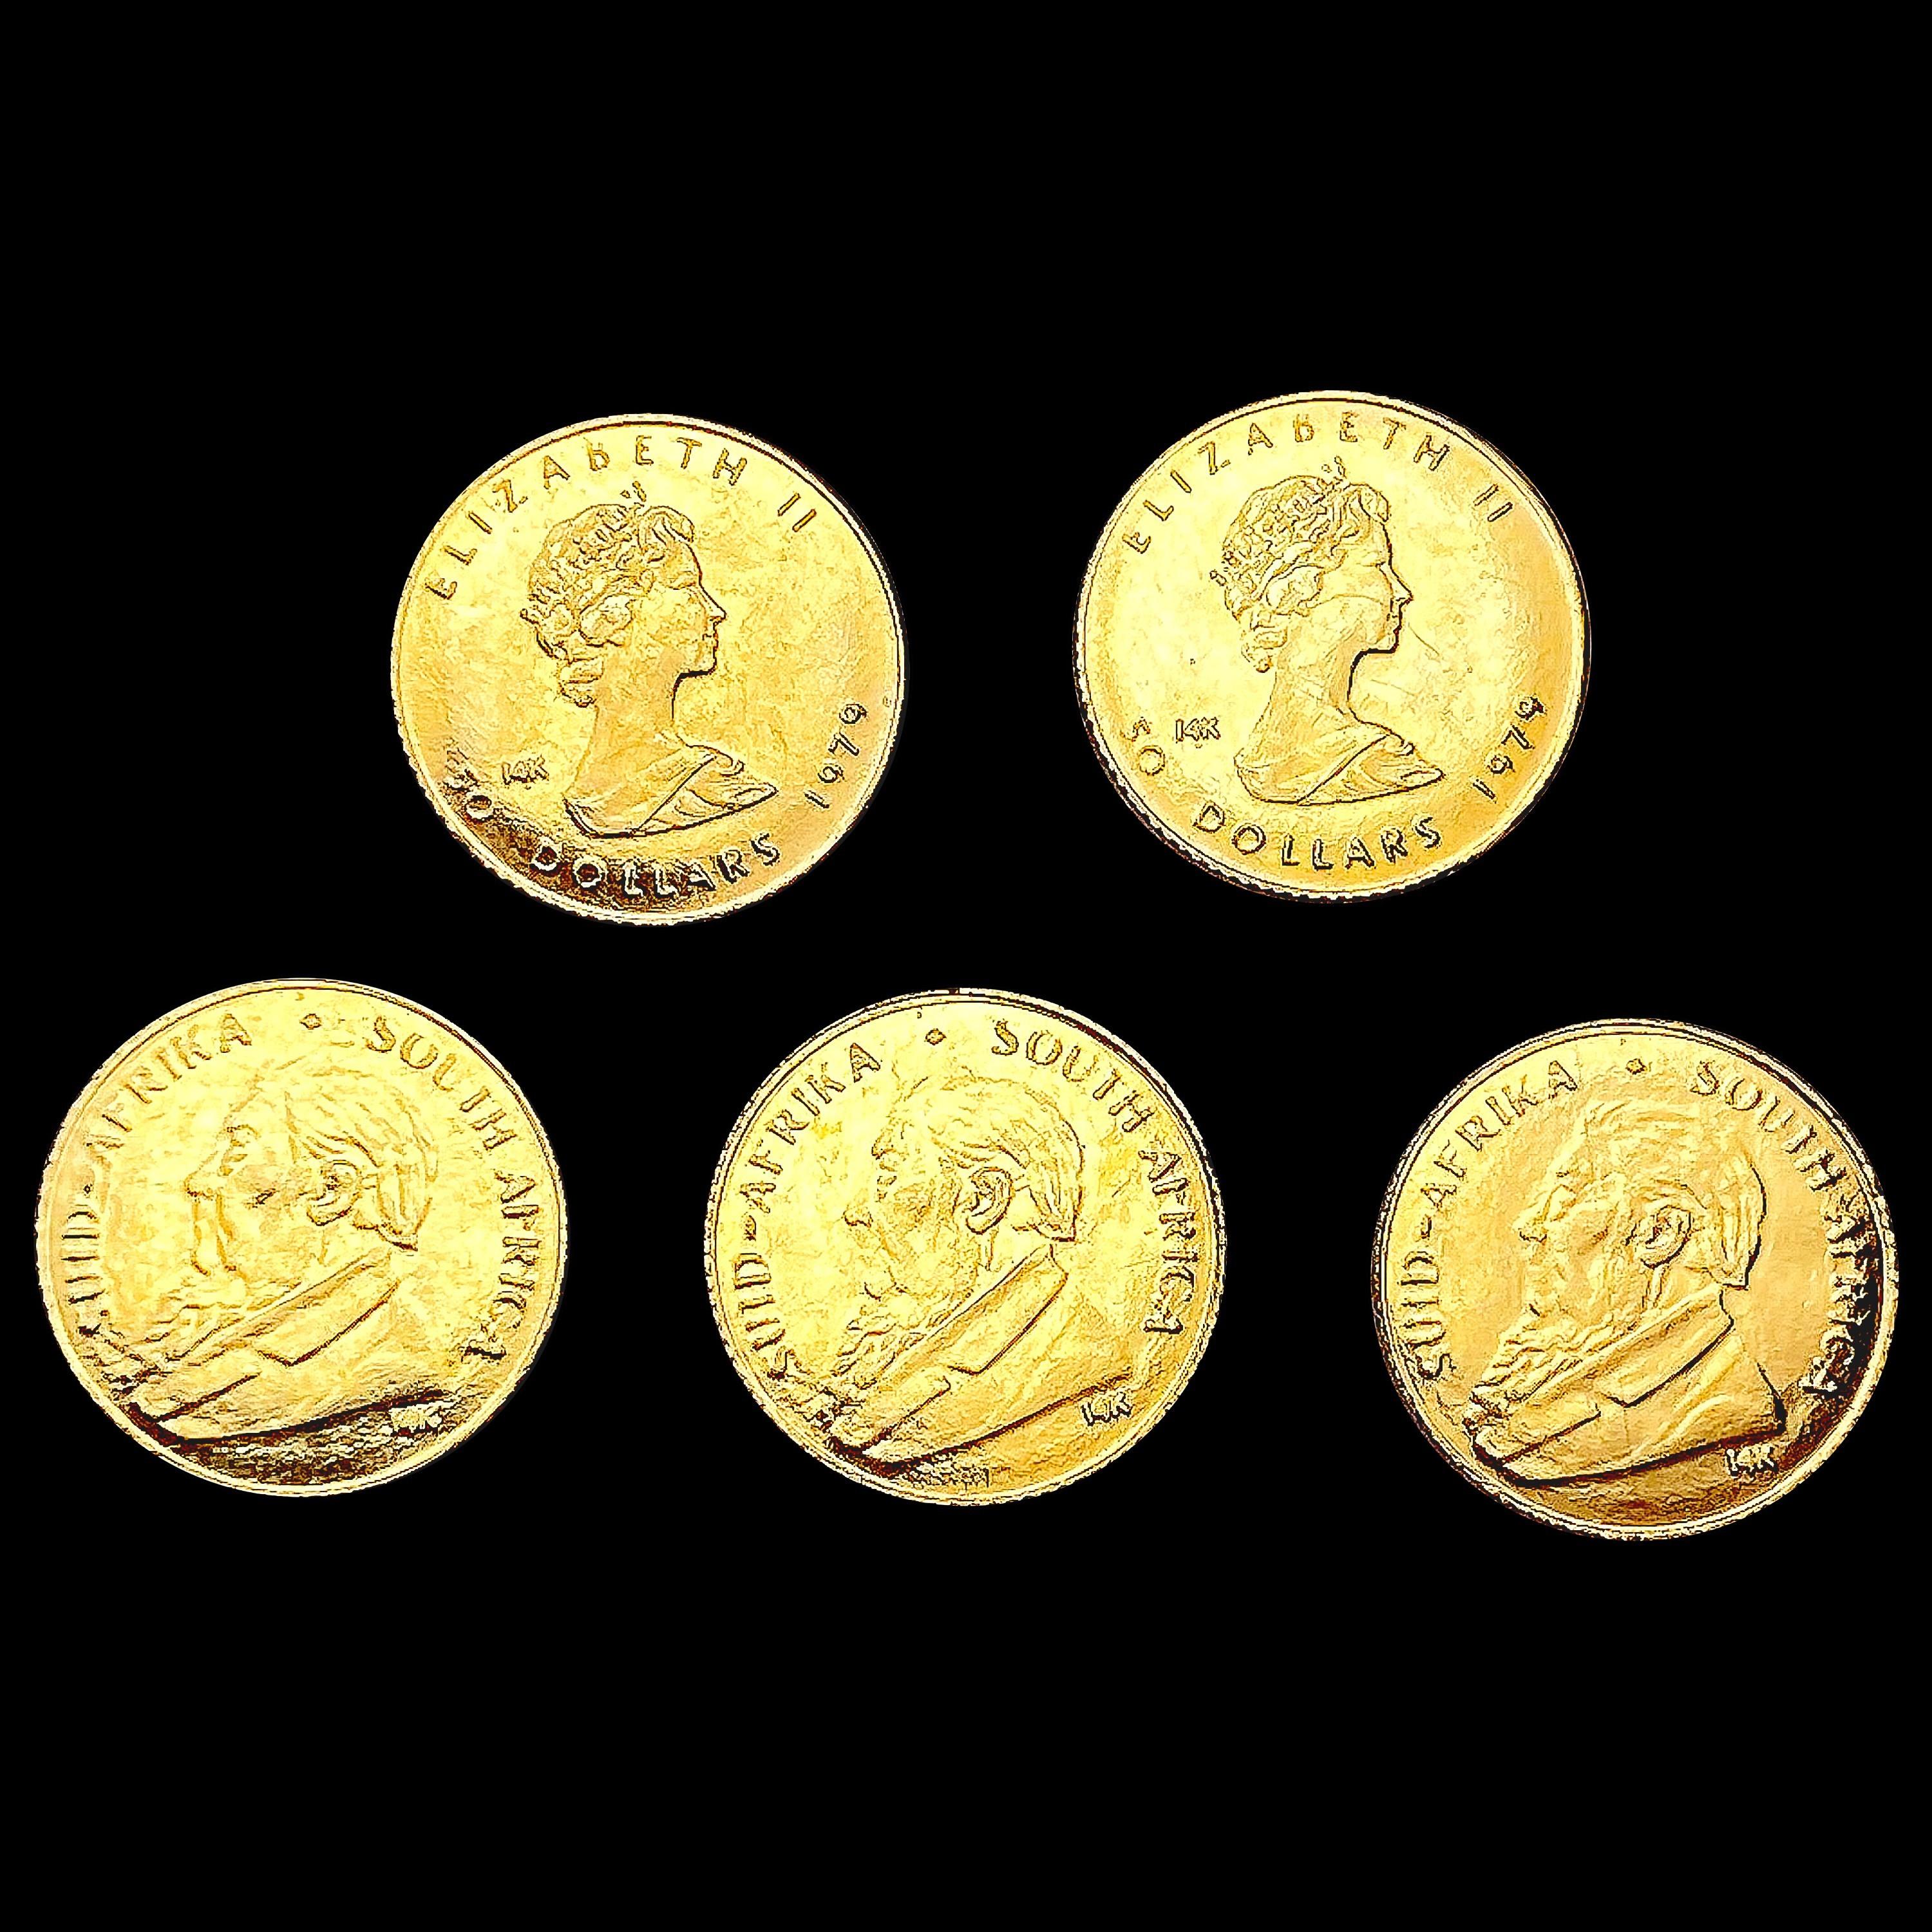 [5] Varied 1/10gm Gold Coinage [[2] 1979, [3] 1980